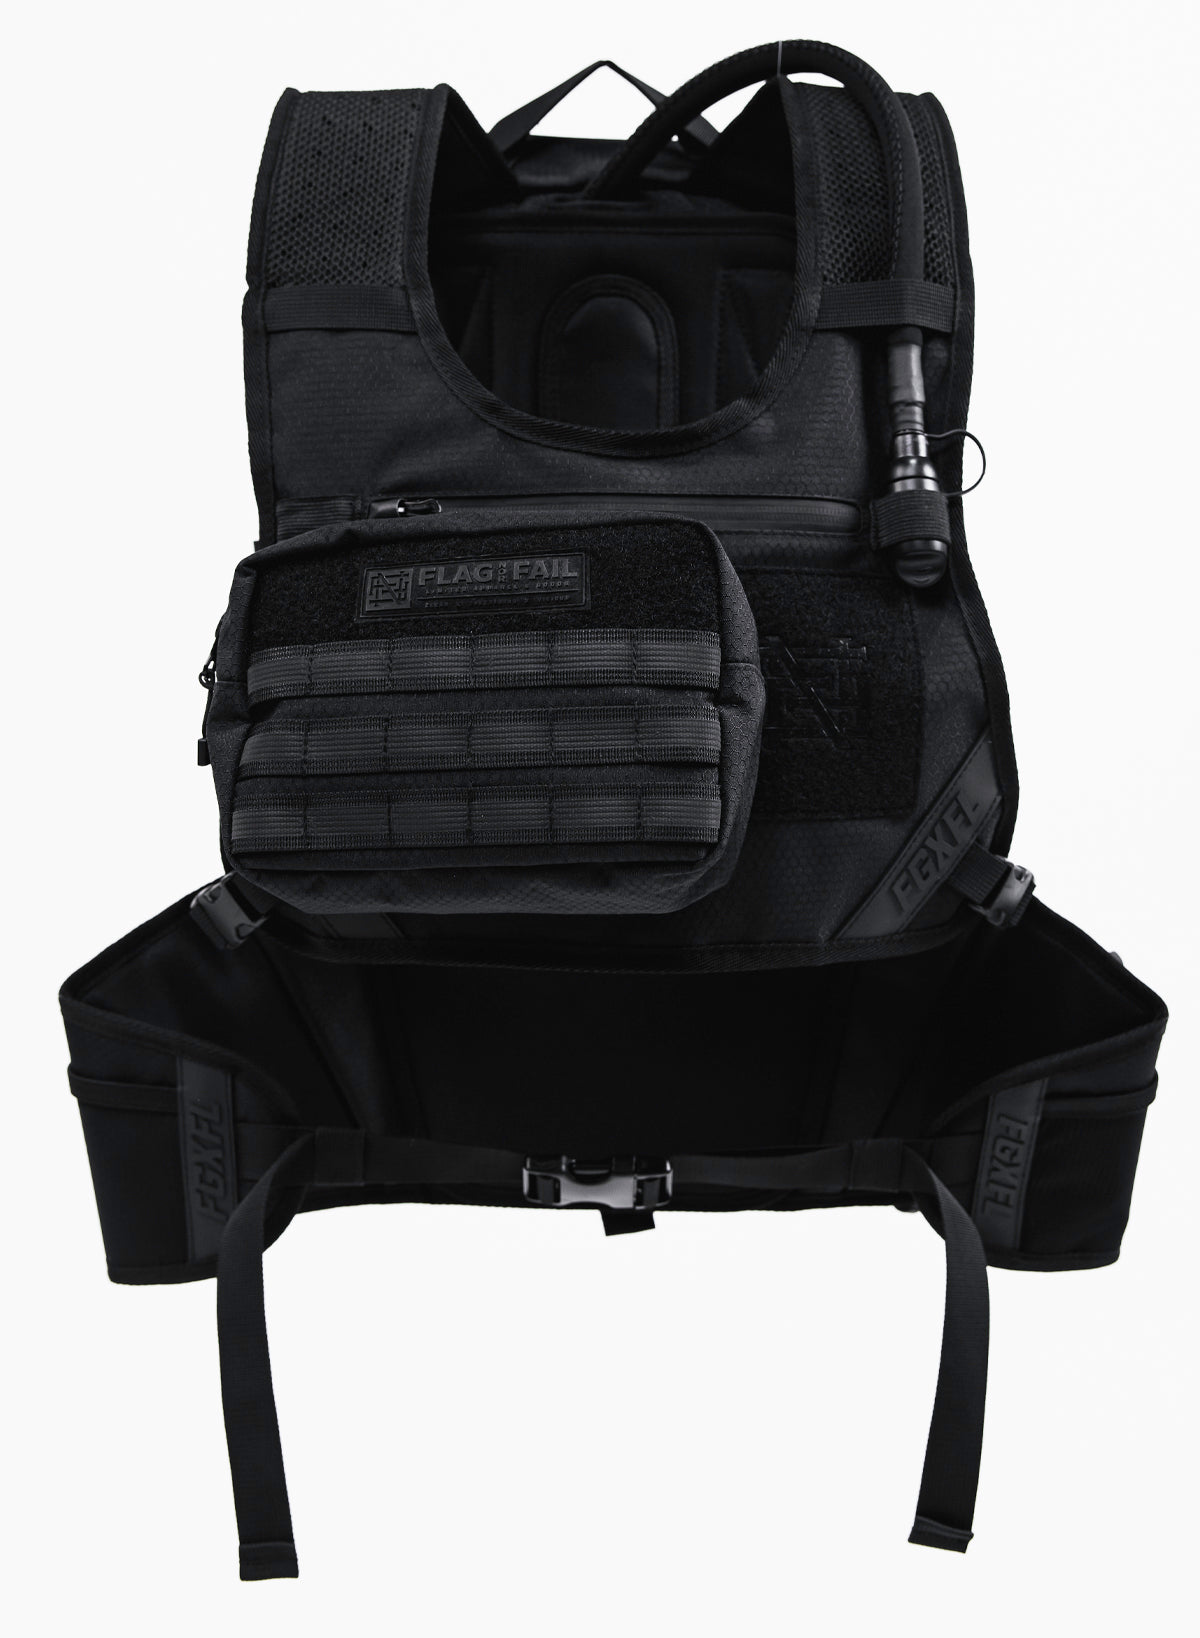 Photo of the 6in Utility Pouch attached to the front of the Apex chest rig.